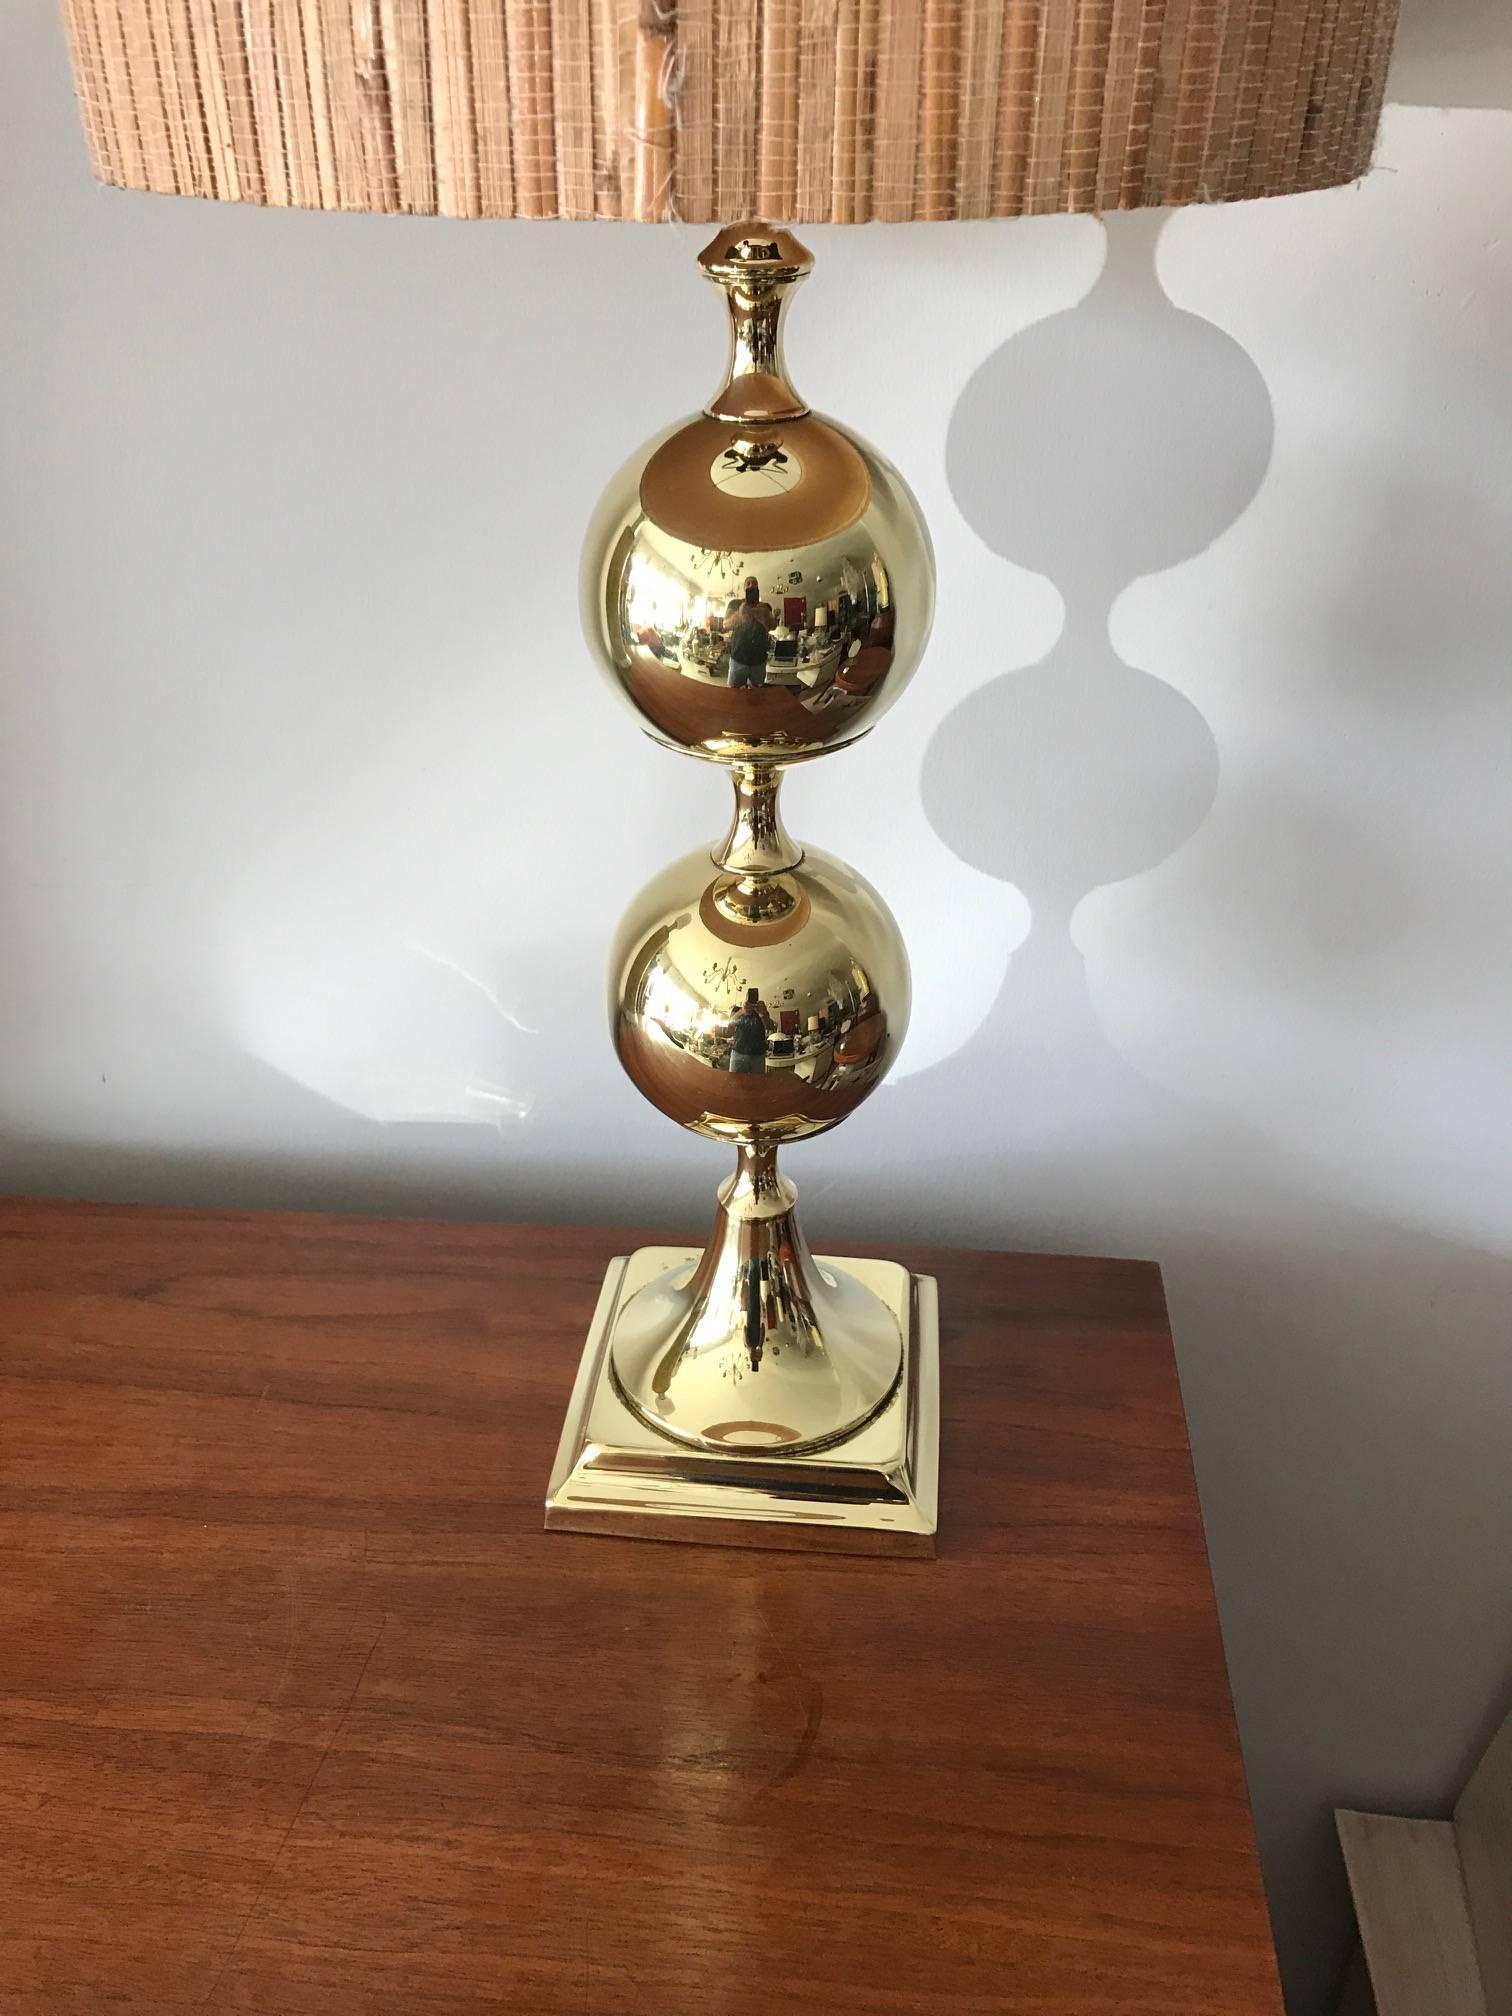 An unusual polished brass table lamp by Tower Craftsman, Red Bank, N.J. circa 1960s. In the style of Tommi Parzinger-well made, with original finial.